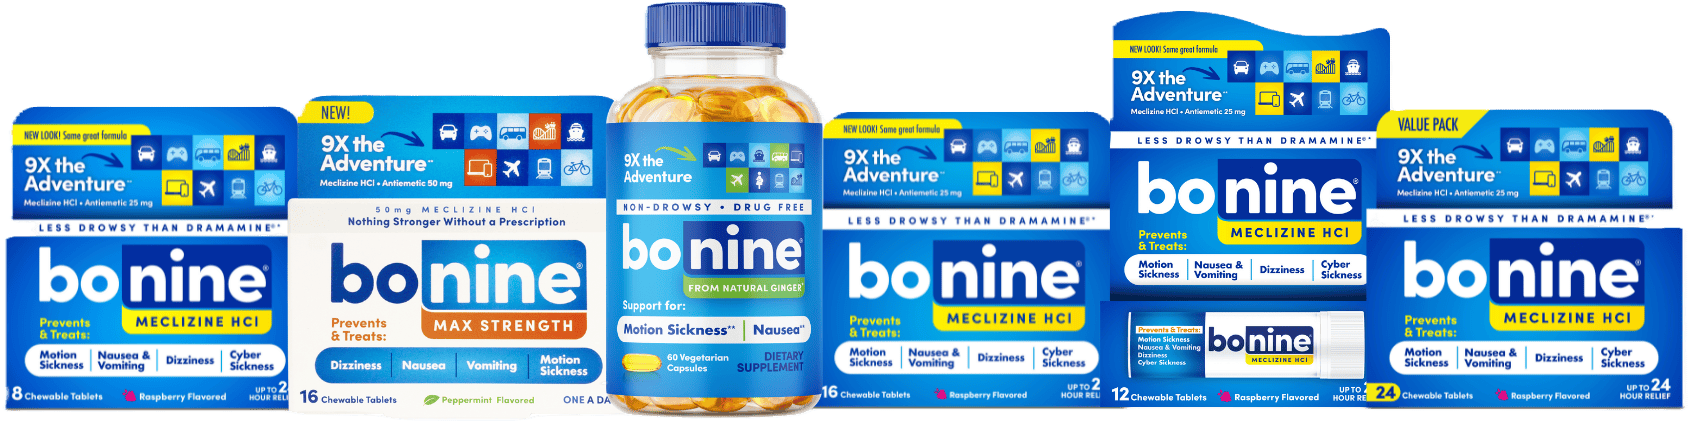 A variety of Bonine motion sickness relief products displayed in a line. This includes chewable tablets in regular and max strength and a non-drowsy, drug-free dietary supplement made from natural ginger.